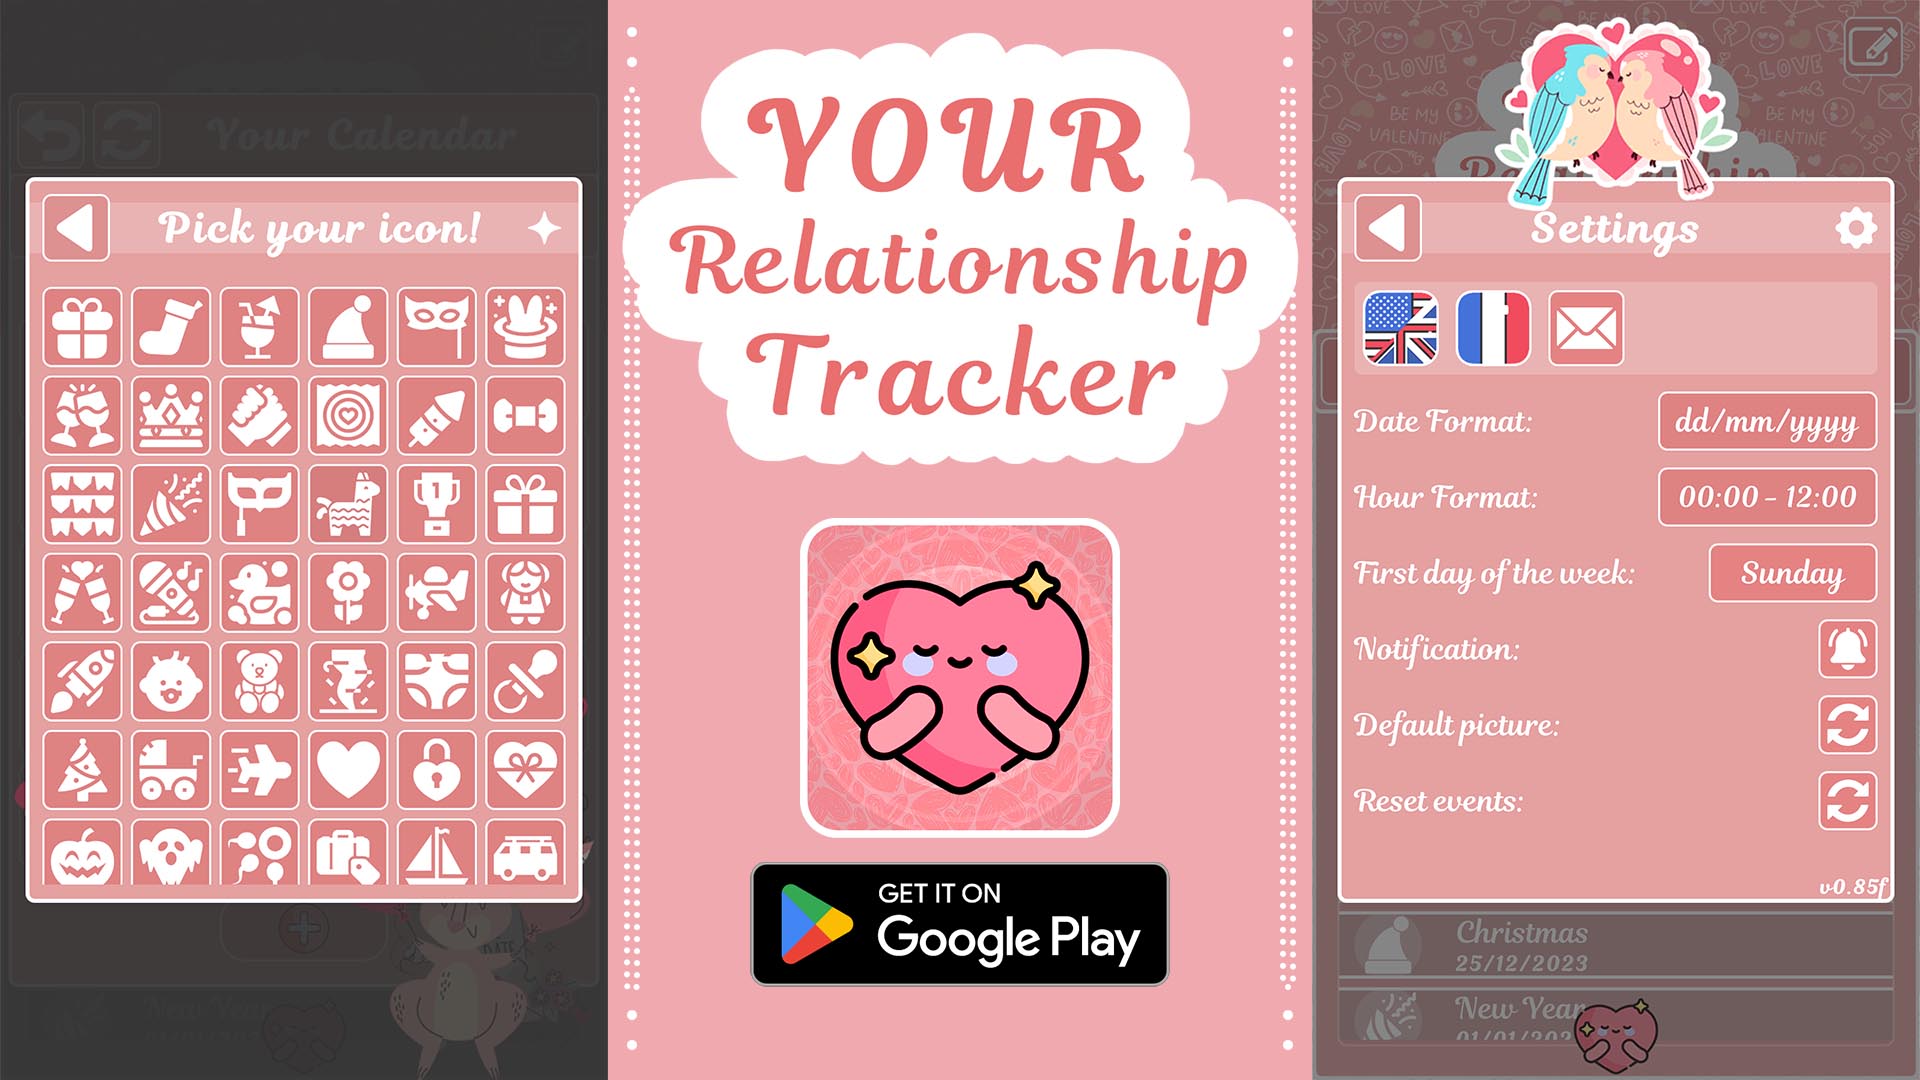 Your Relationship Tracker - 1920 x 1080 Screen 3